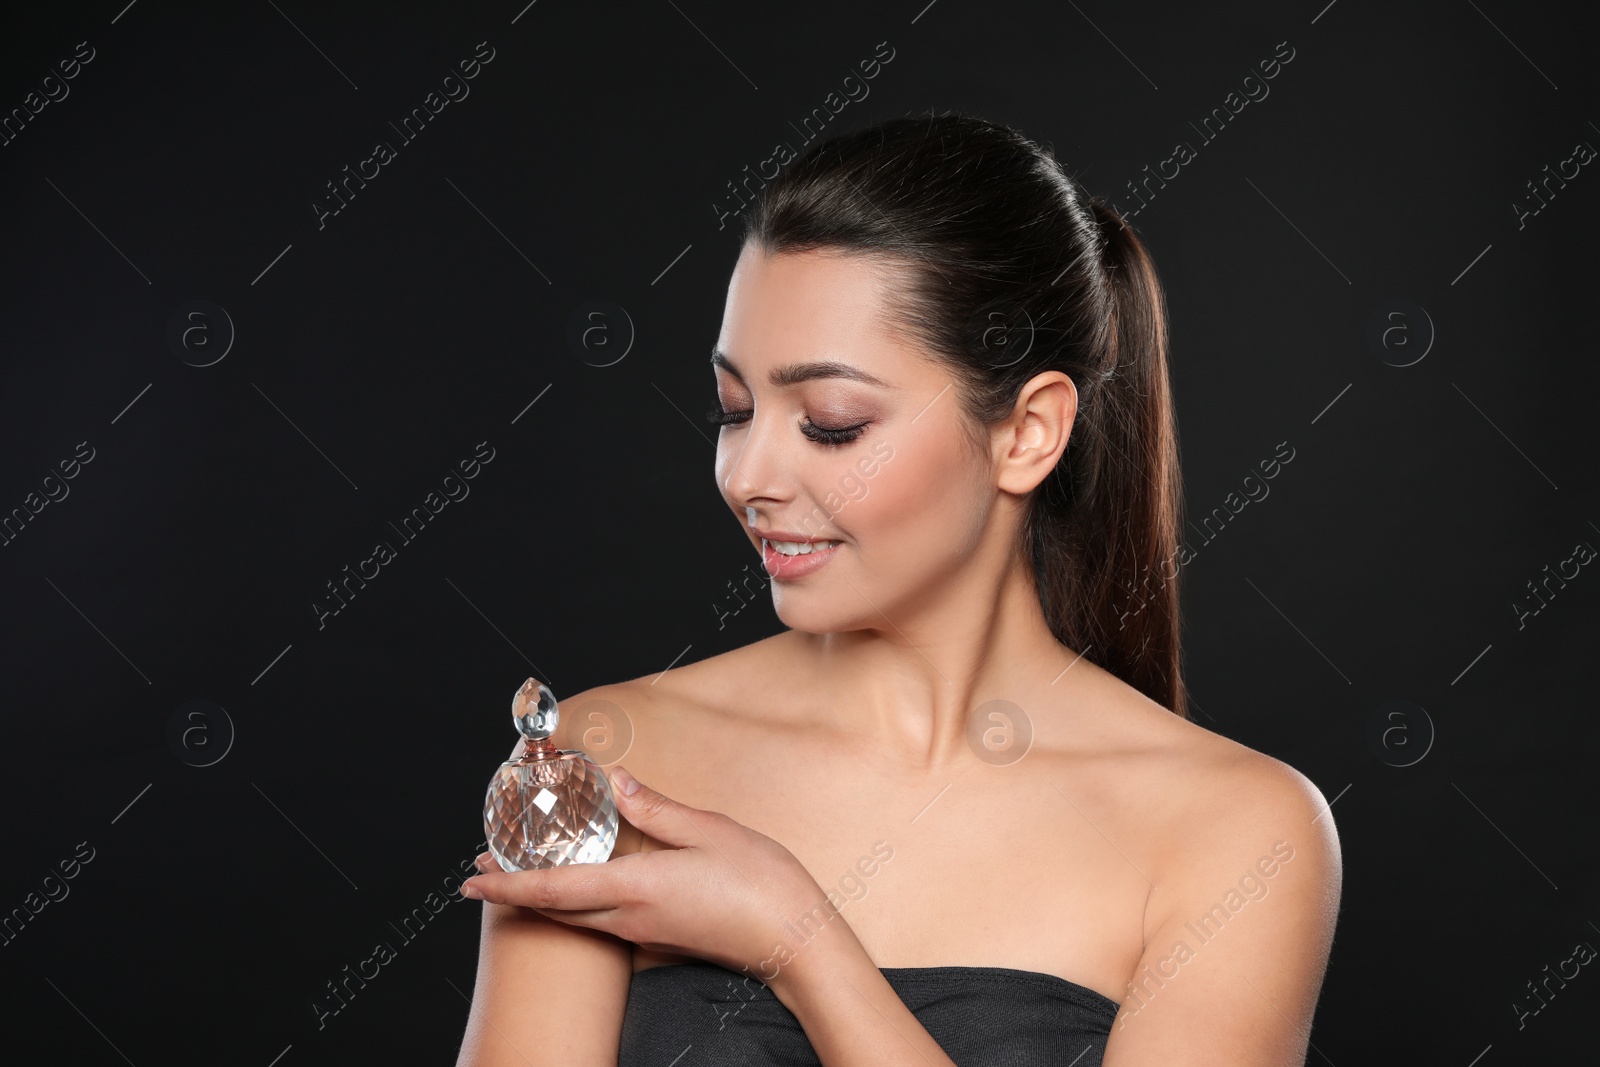 Photo of Young woman with bottle of perfume on black background